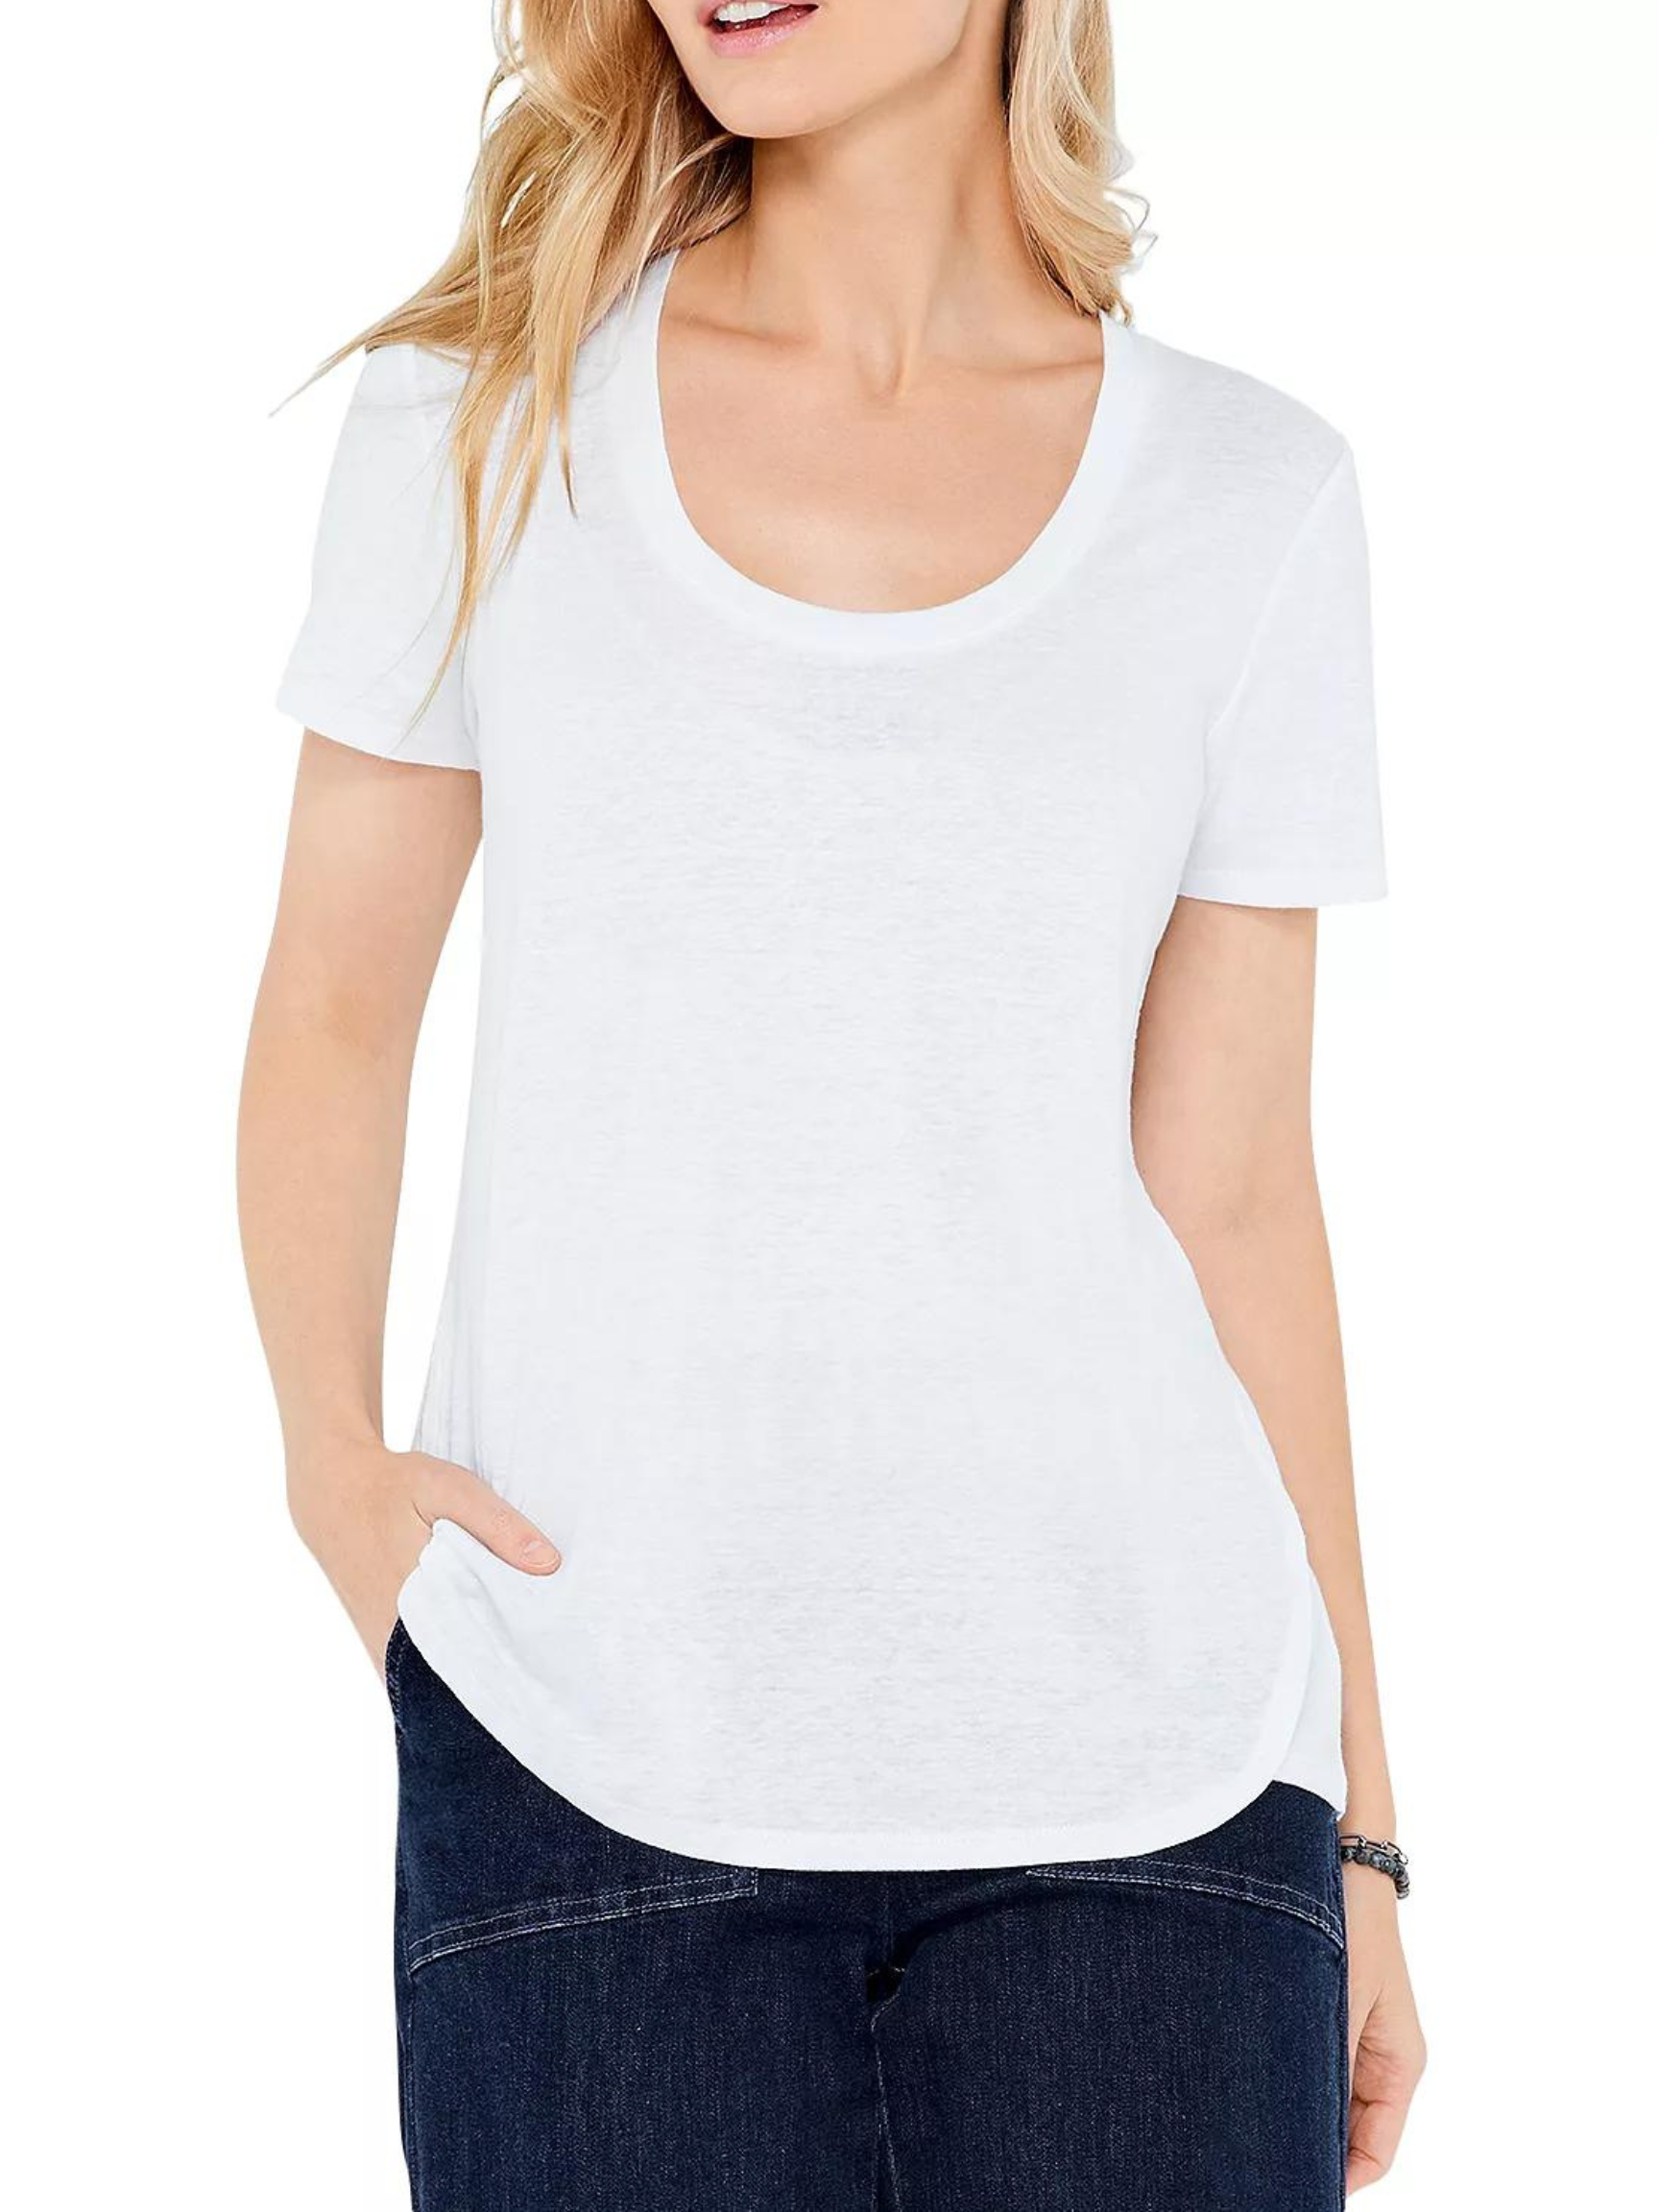 perfect white tee for women